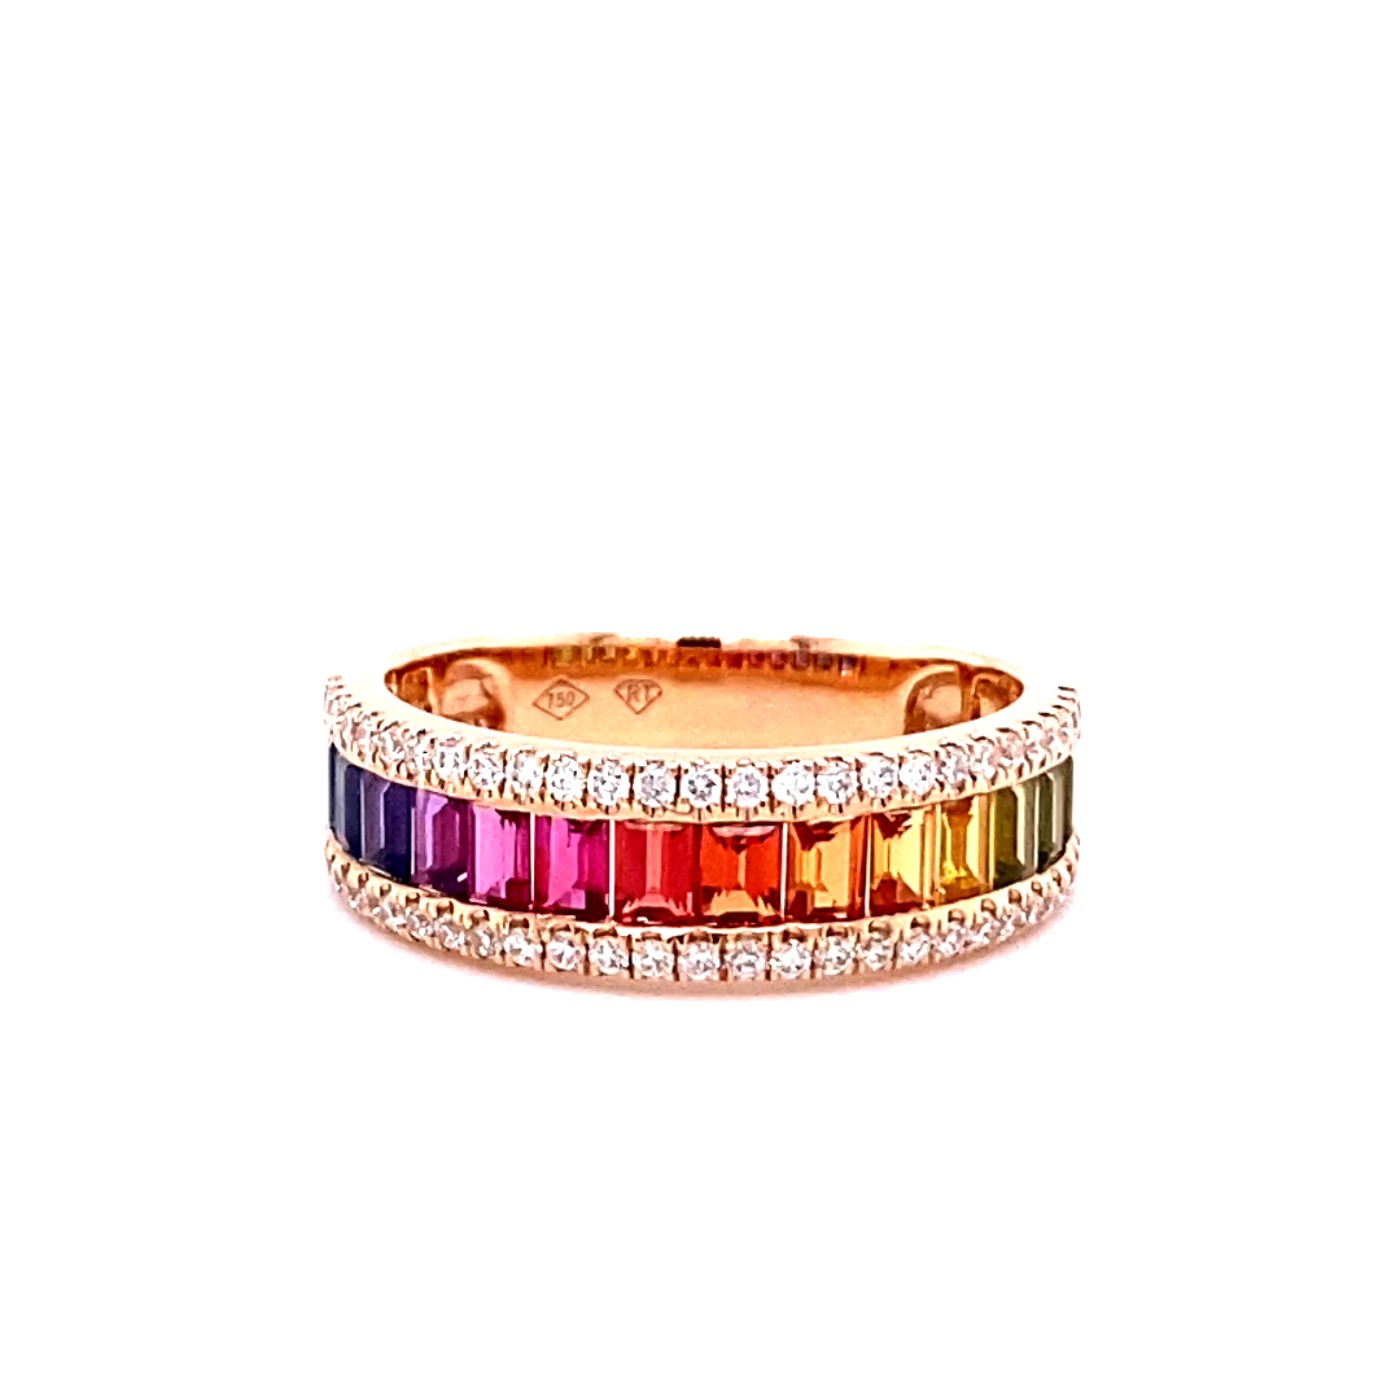 18k rose gold diamond & sapphire multirow ring with 1.37 ct sapphire and 0.26 ct diamonds Photos & images